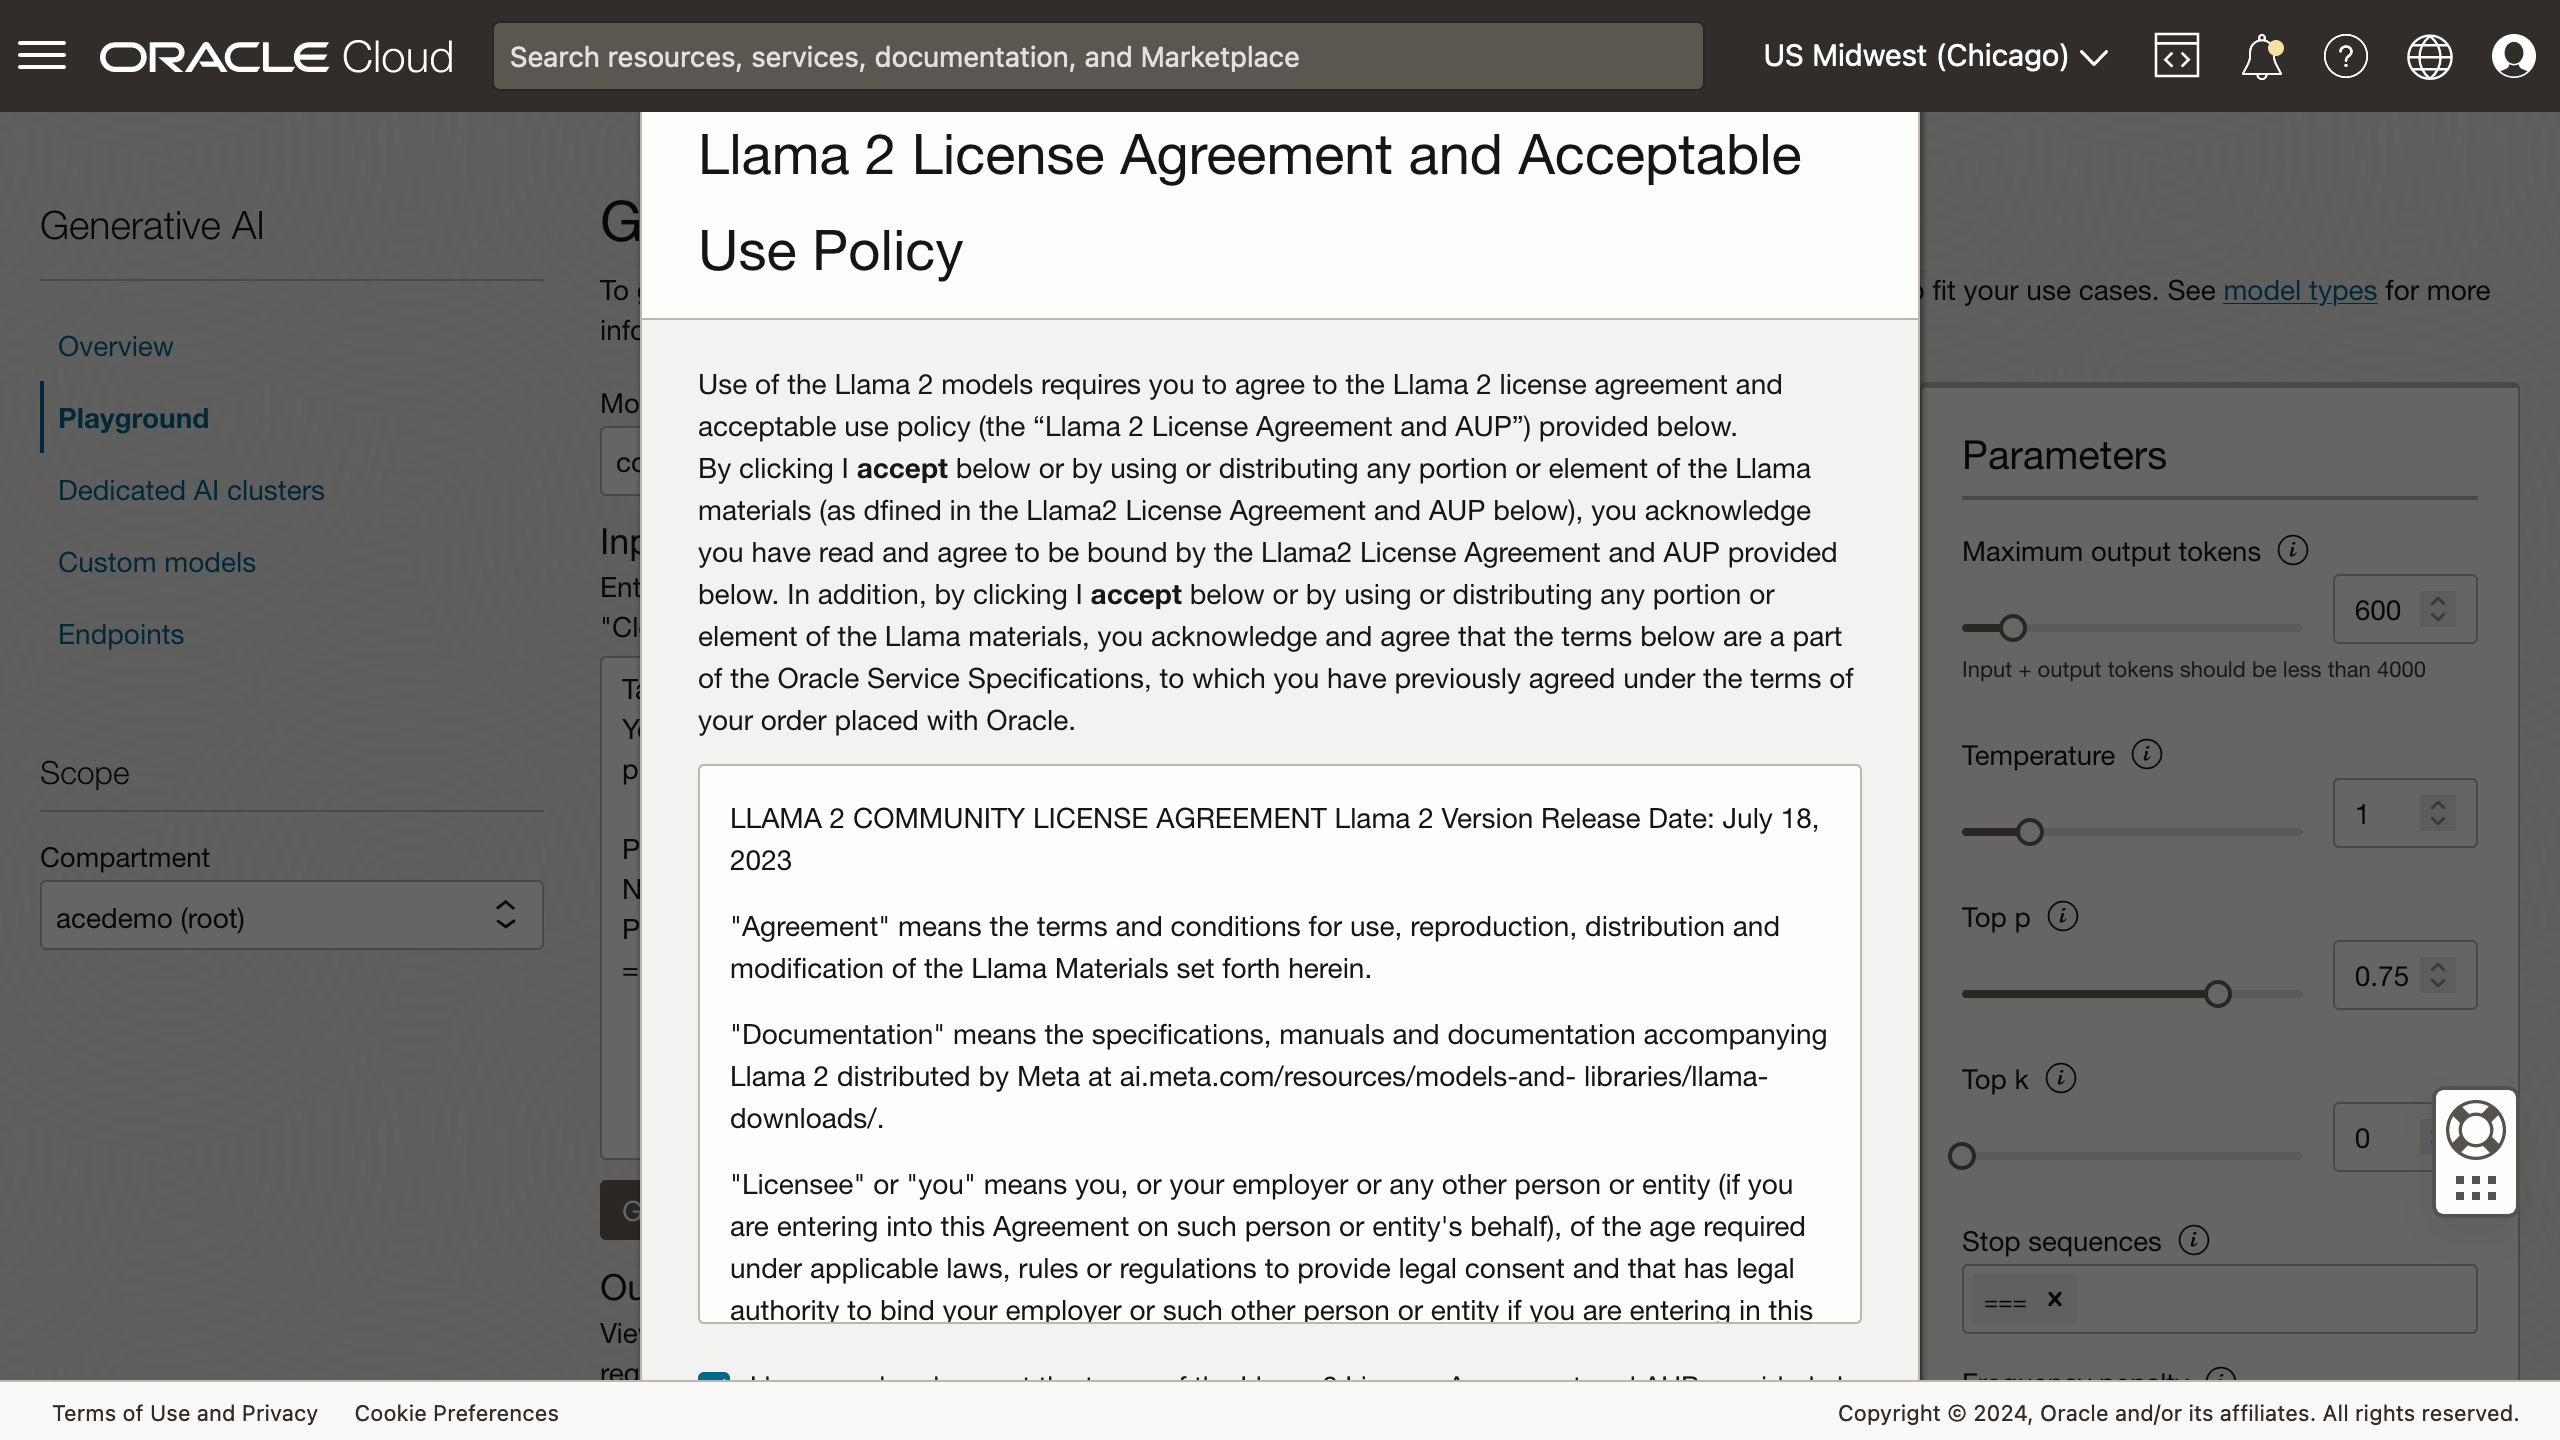 Aggreement to the terms of use for Llama2 is required.